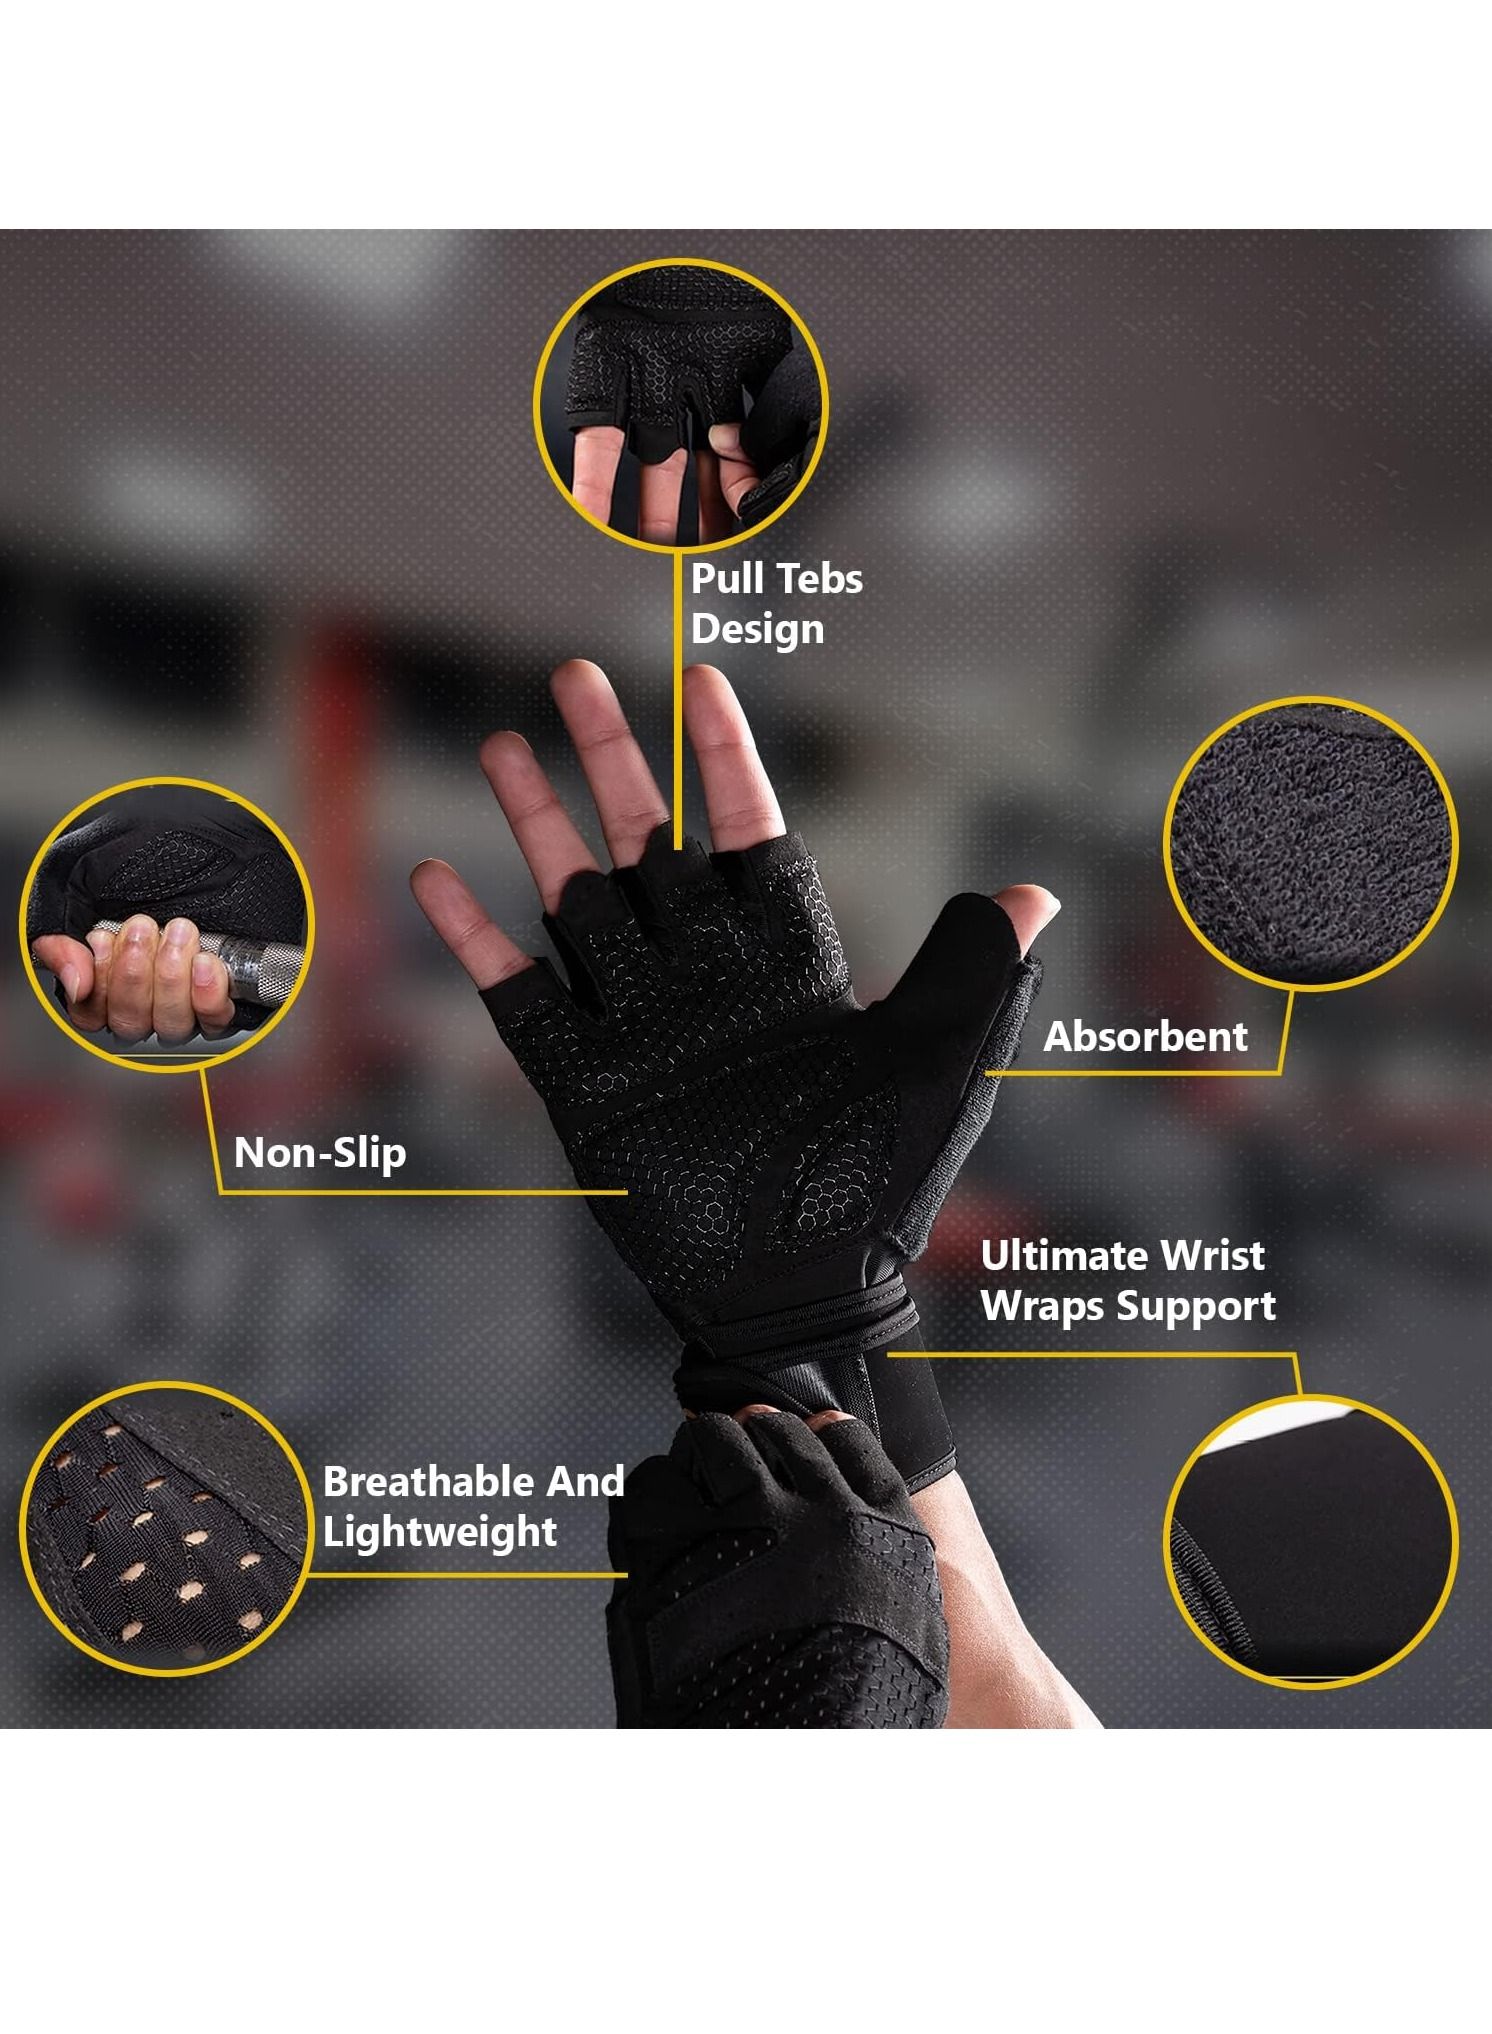 Gym Gloves Ventilated with Wrist Support Full Palm Gloves Protection for Fitness, Weightlifting, and Pull-Ups - Breathable Gloves for Men and Women - Standard Size 